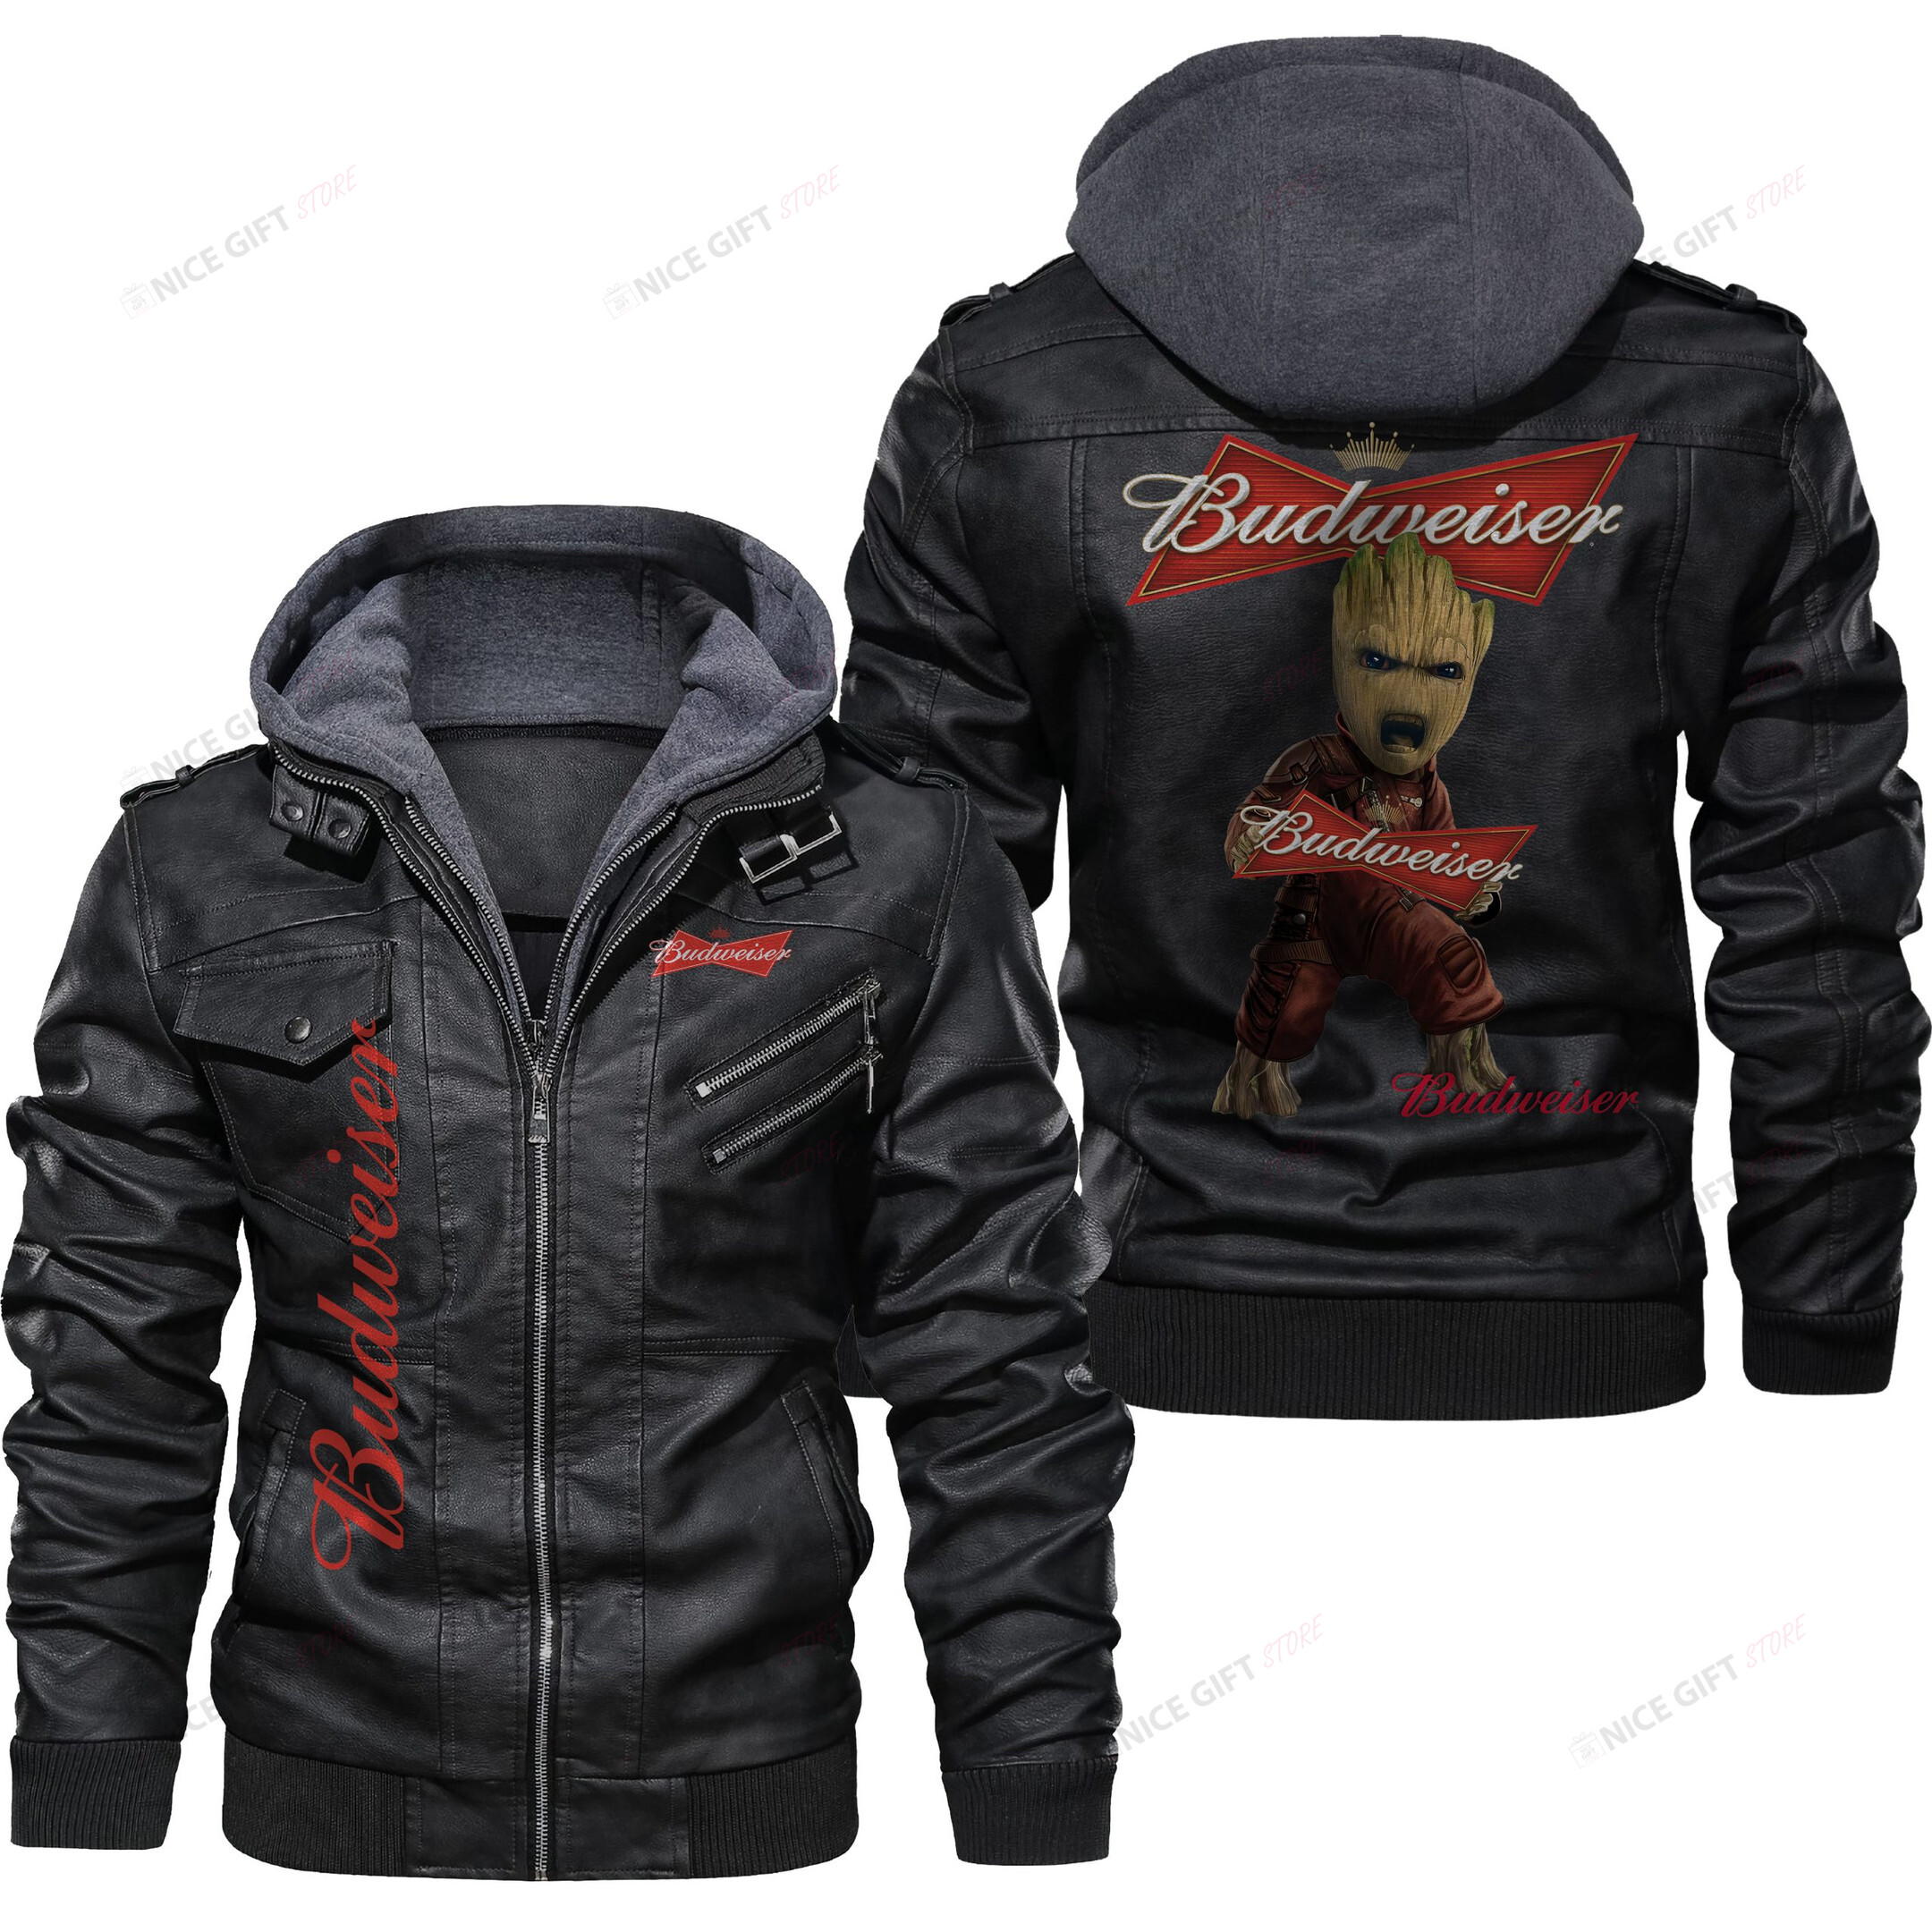 These leather jackets are perfect for winter fashion 123